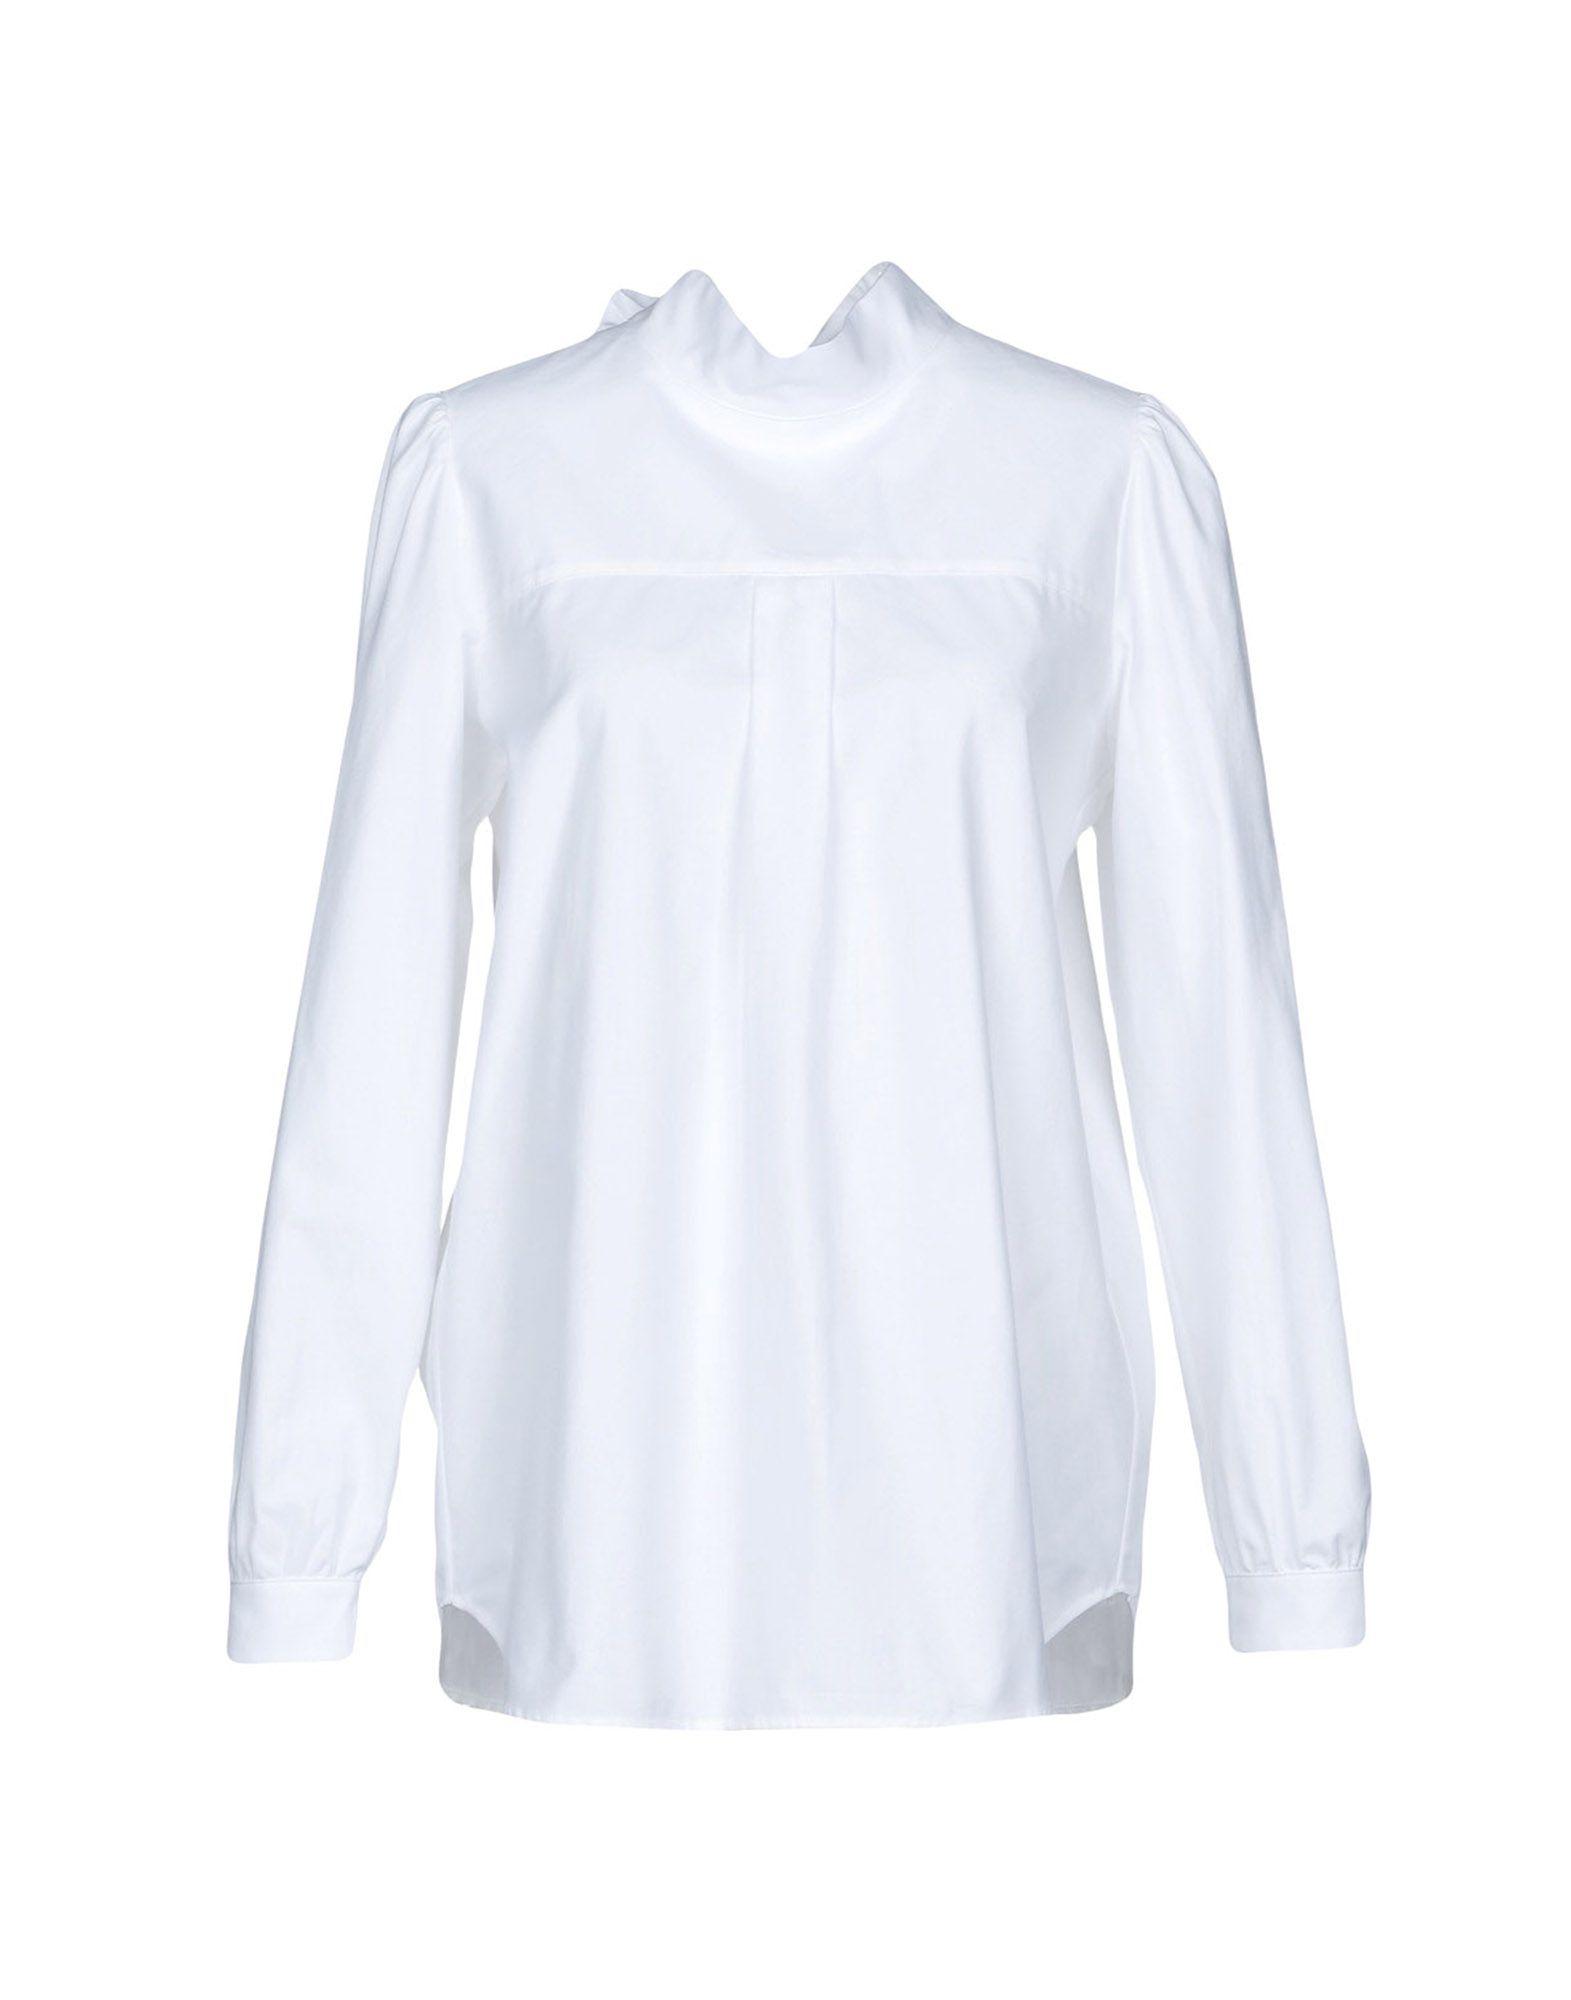 Golden Goose Deluxe Brand Cotton Blouse in White - Lyst